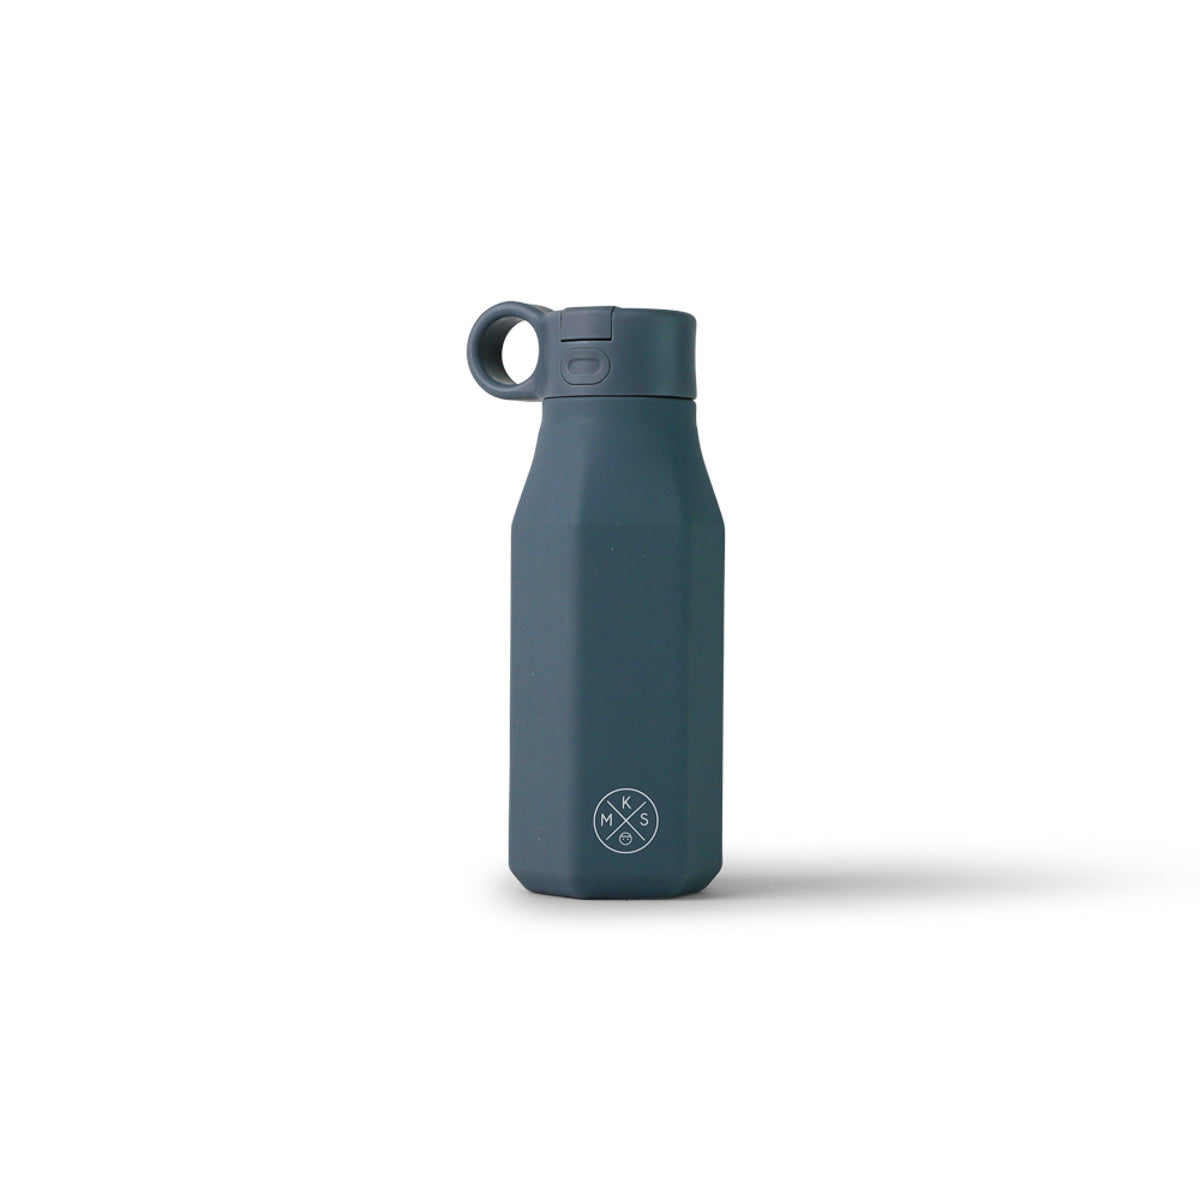 Durable, easy to clean, durable, a perfect on-the-go water bottle in soft matte food grade silicone BPA free with straw lid and handle on the top. Must have at school, while traveling or simply at home. For kids and adults. MKS Miminoo Arizona USA Brand. 13 colors. Wholesale Faire. Charcoal grey for boys and girls.